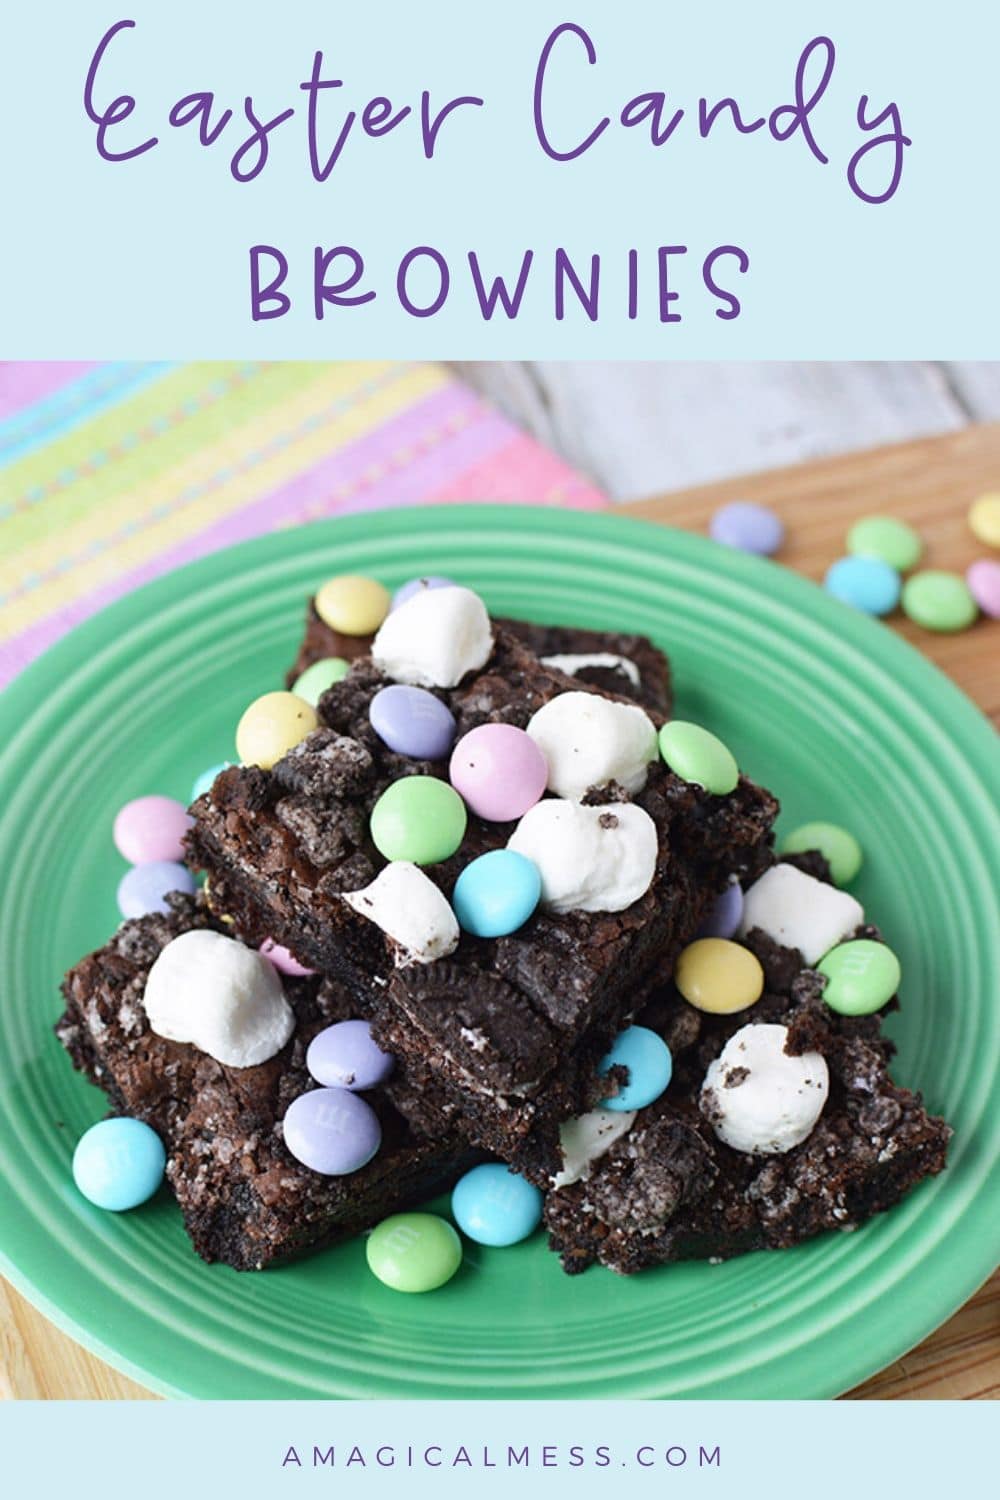 Brownies with marshmallow and candies on a plate